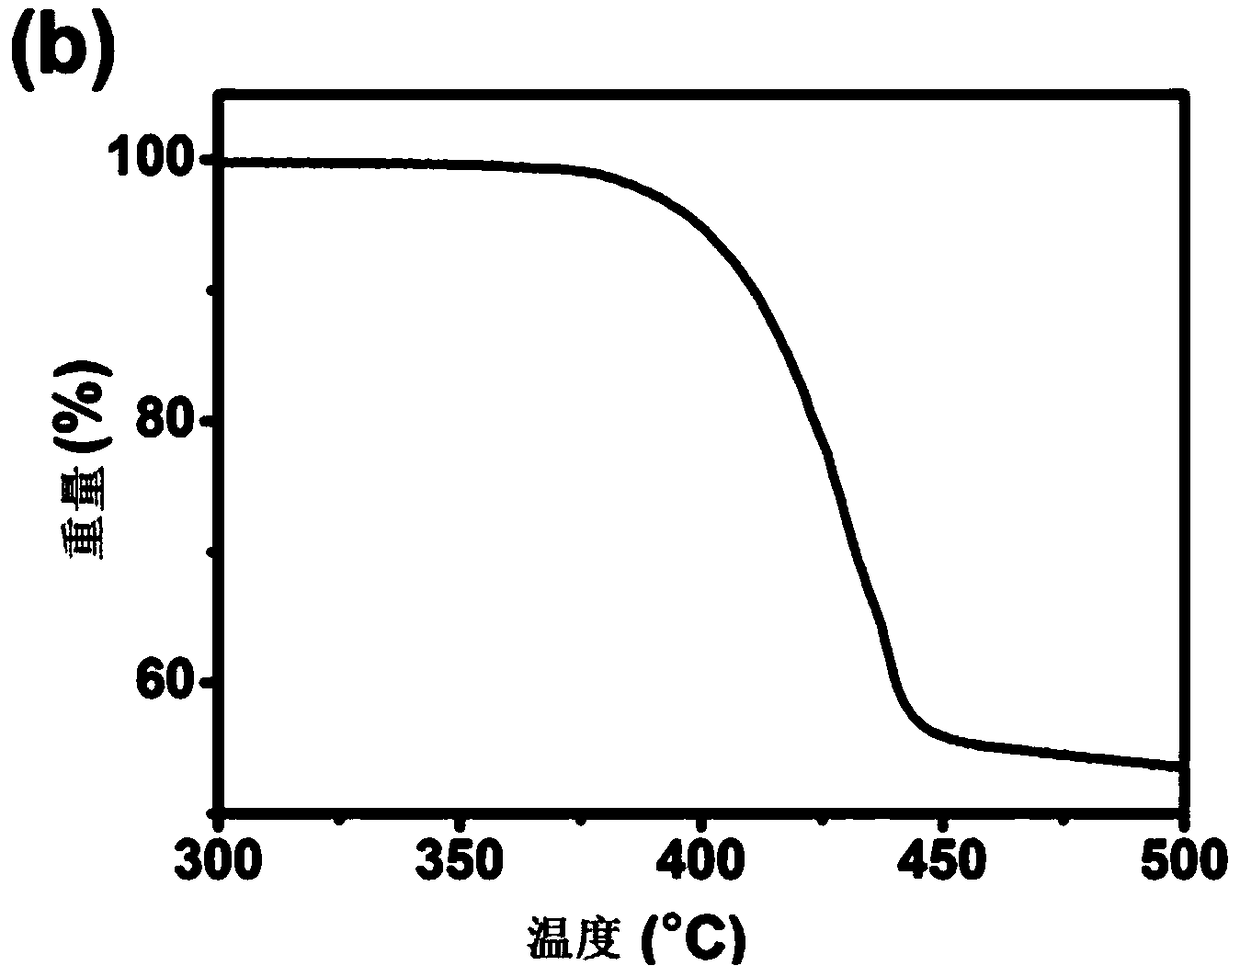 Perylene diimide hexamer compound and preparation method, composition and organic solar cell